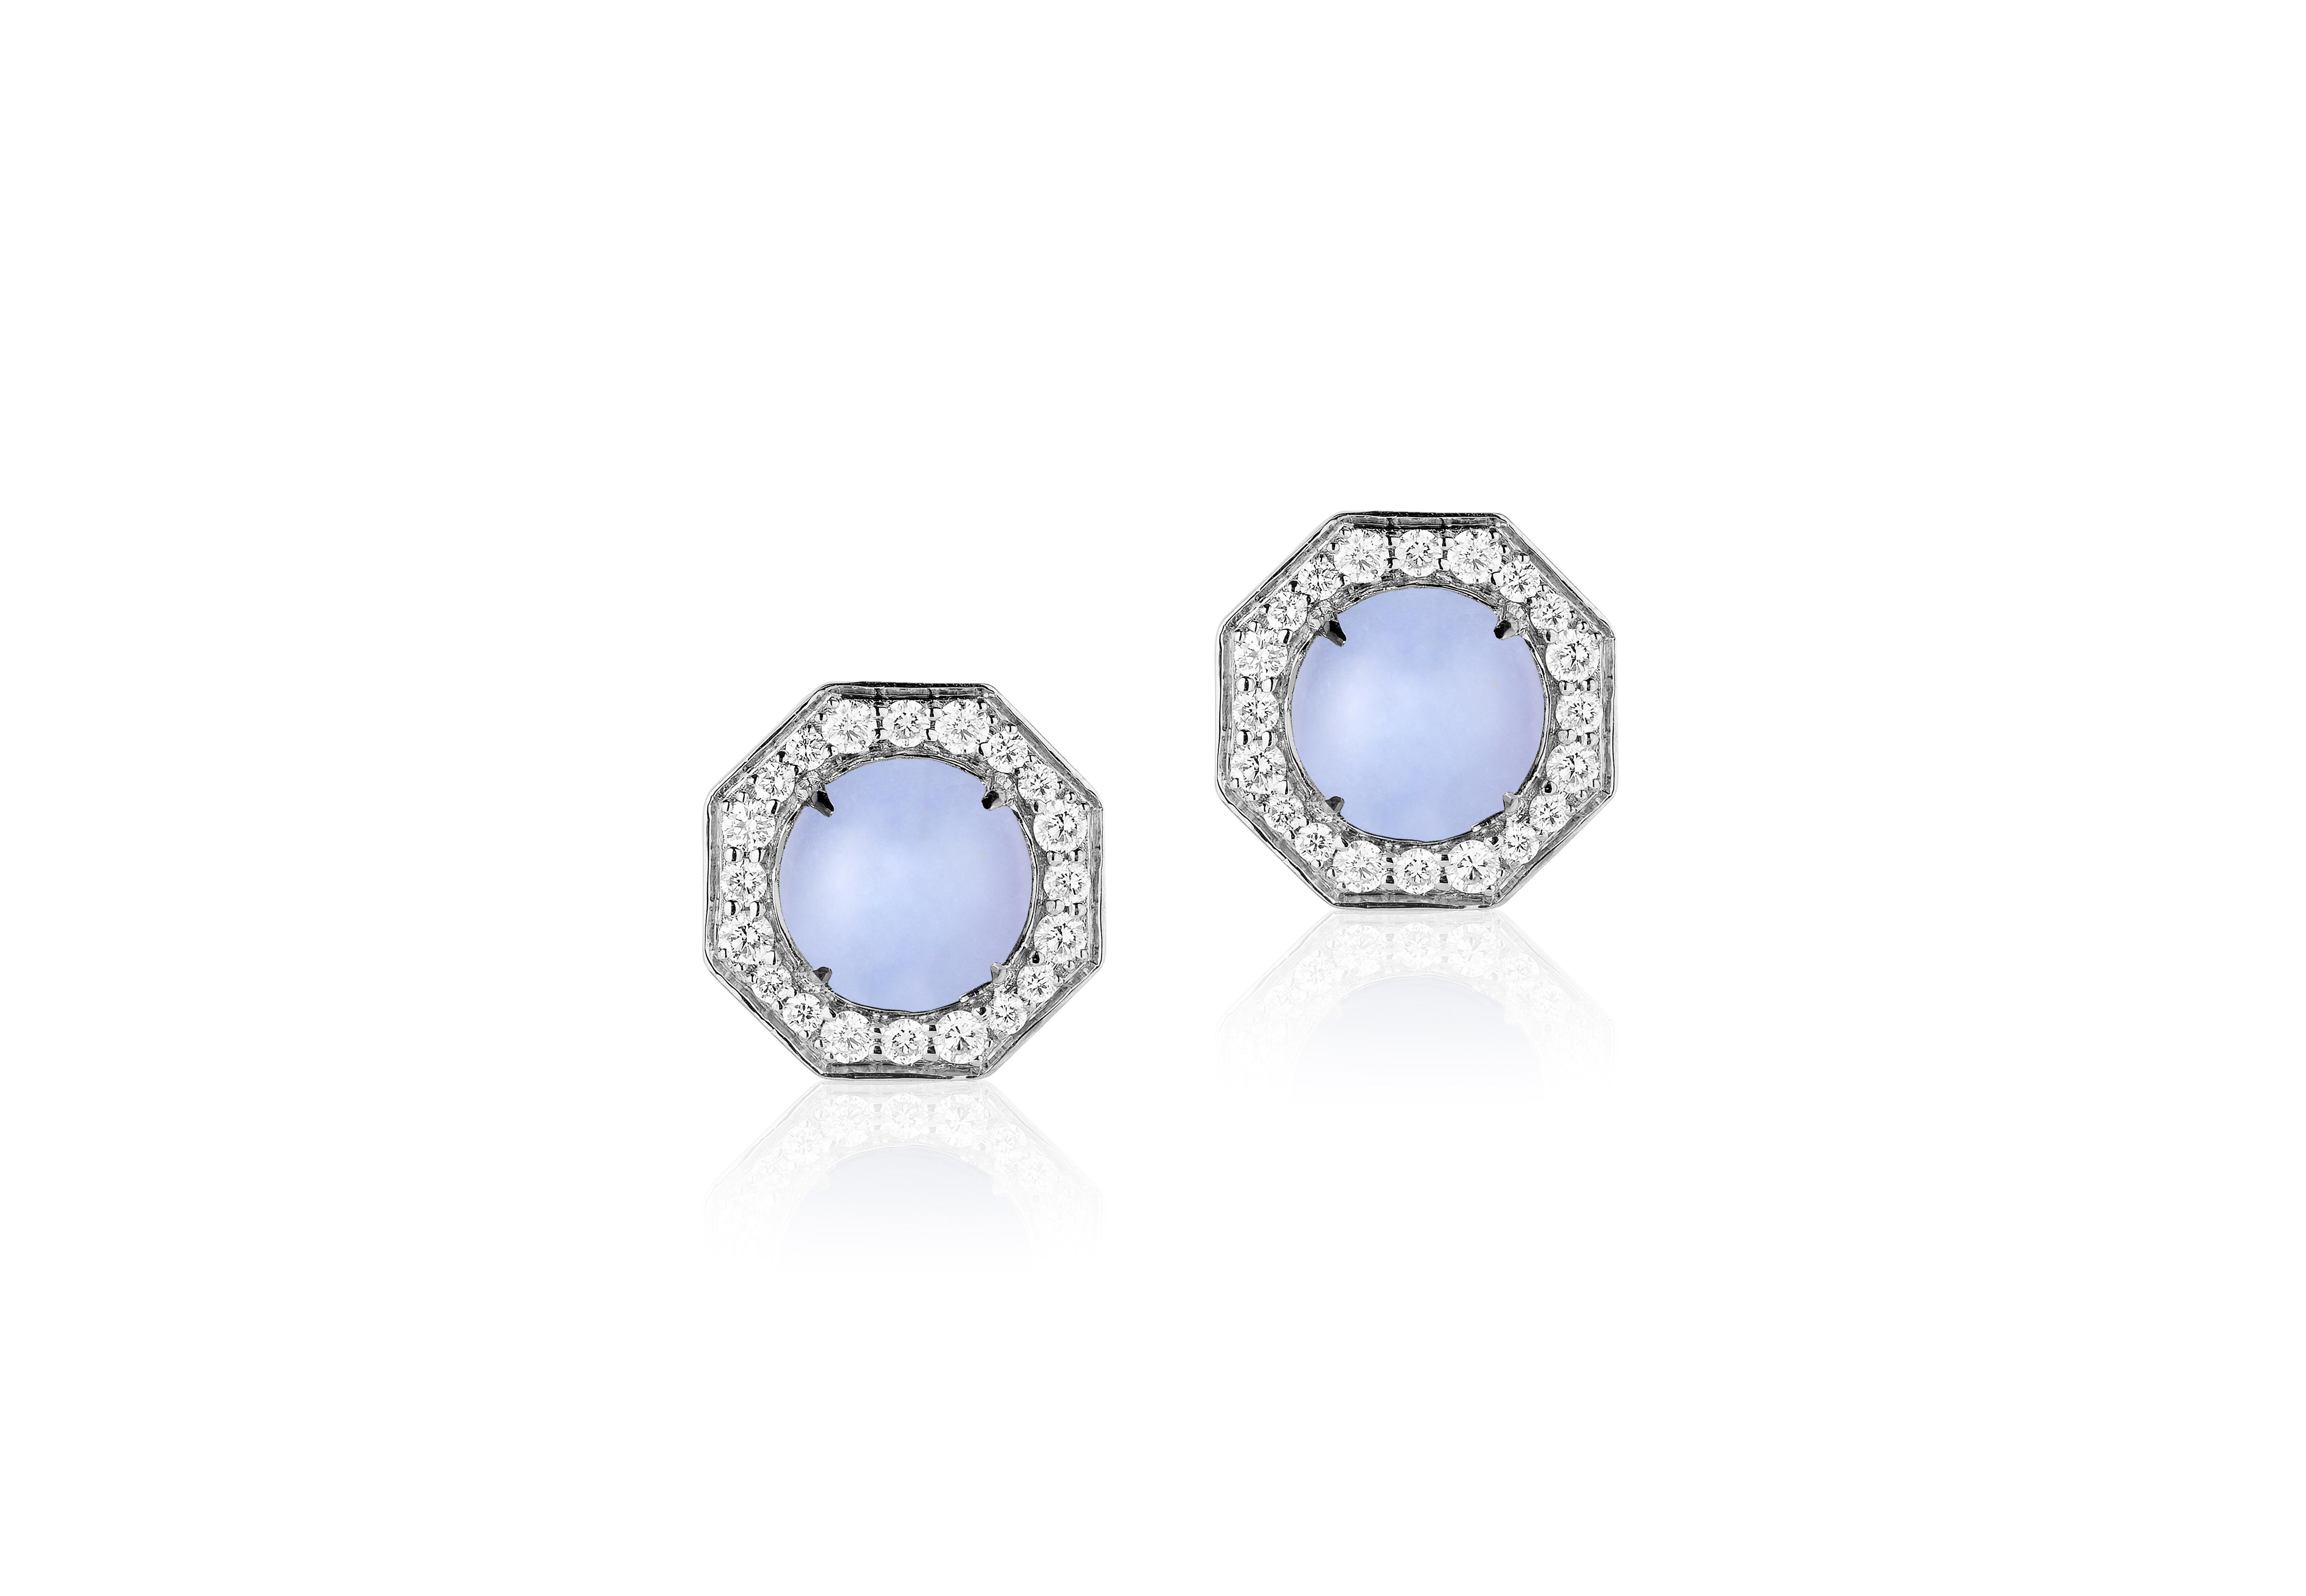 Blue Chalcedony Small Pendant With Diamonds in 18k White Gold and Black Rhodium, from 'Rock N Roll' Collection

Stone Size: 8 mm

Gemstone Weight: Chalcedony- 1.25 Carats

Diamond: G-H / VS. Approx Wt: 0.36 Carats

Blue Chalcedony Stud Earrings with